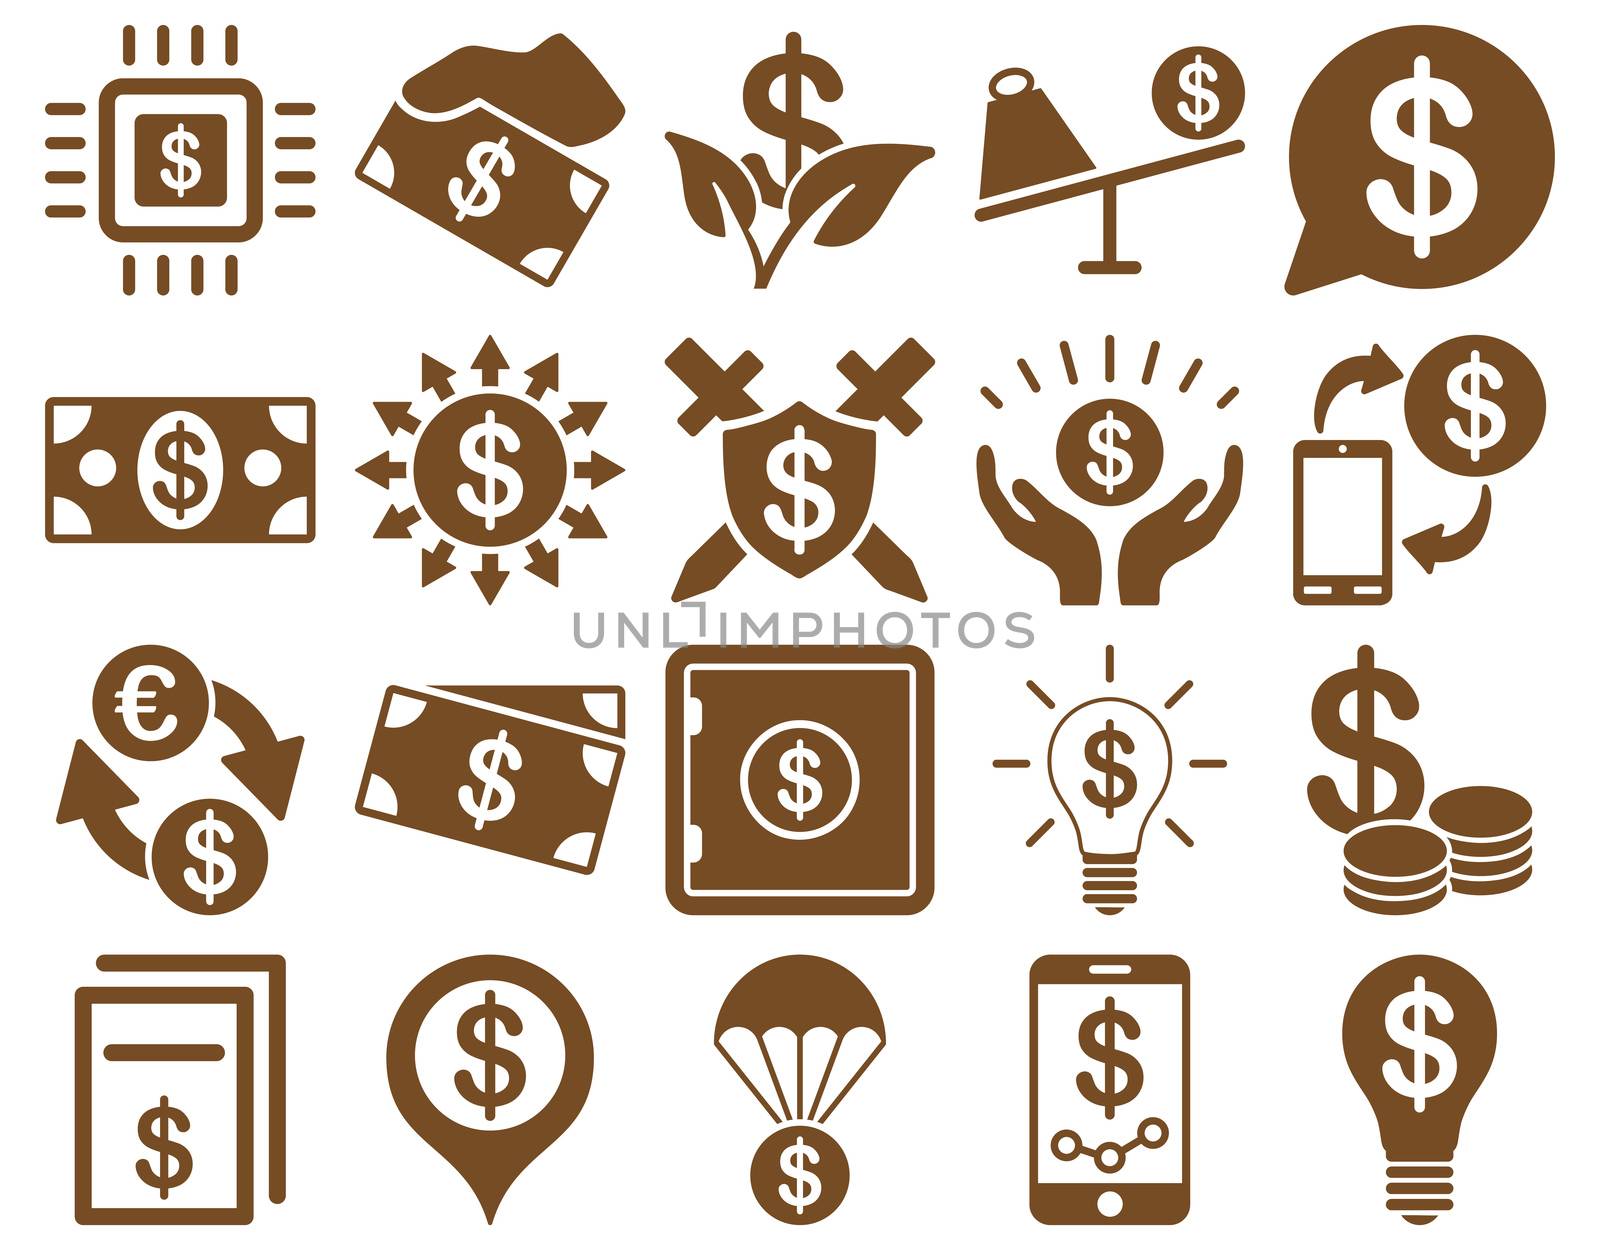 Dollar Icon Set. These flat icons use brown color. Raster images are isolated on a white background.